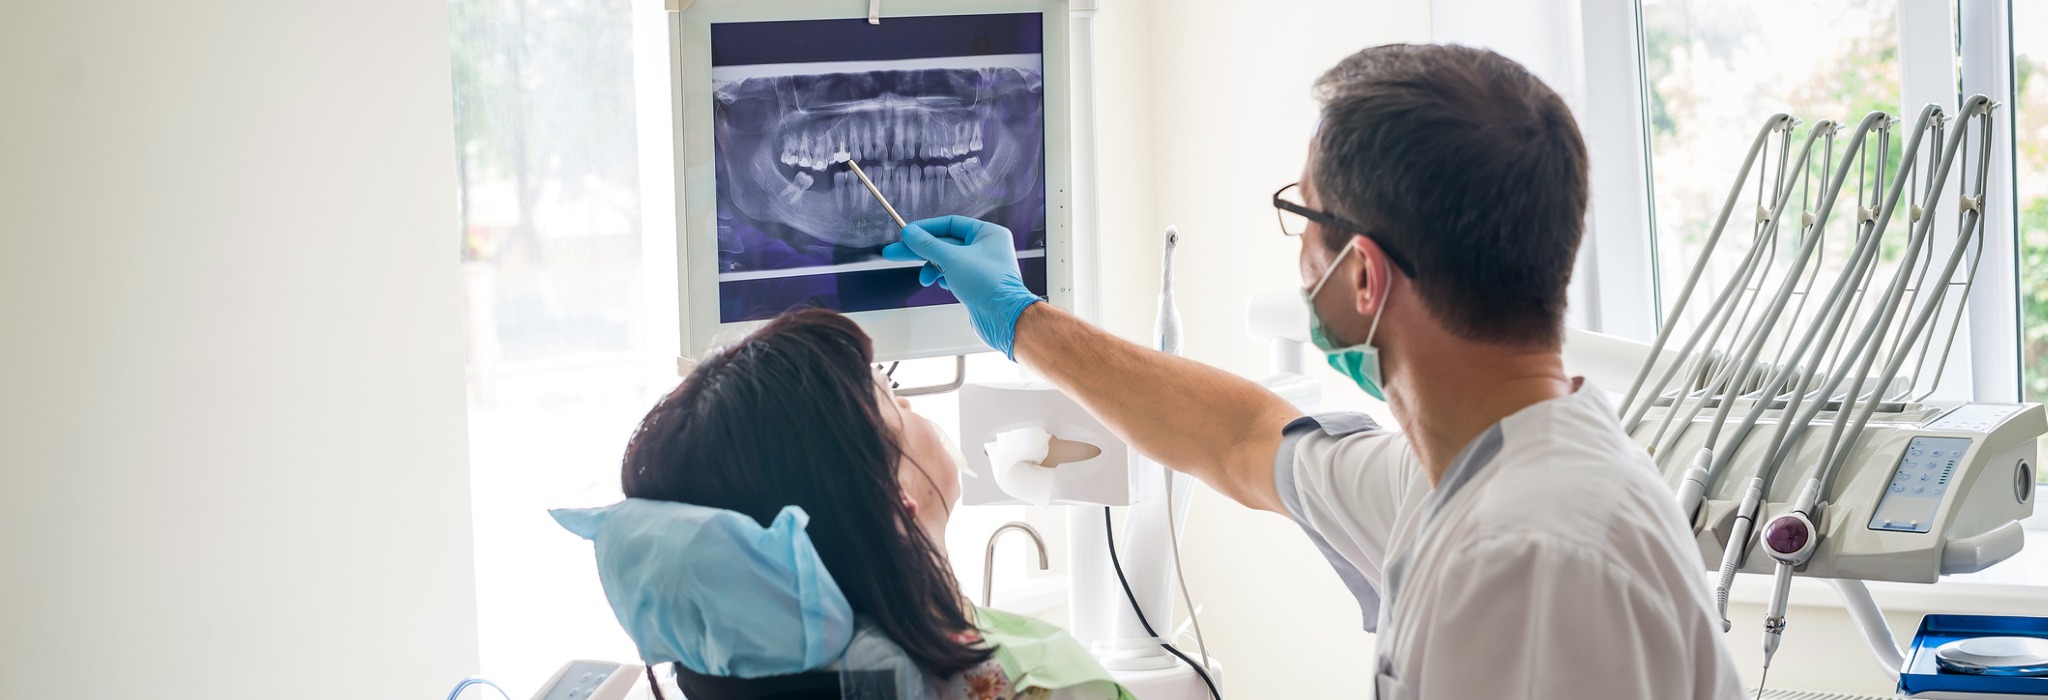 doctor-dentist-showing-patients-teeth-on-xray-picture